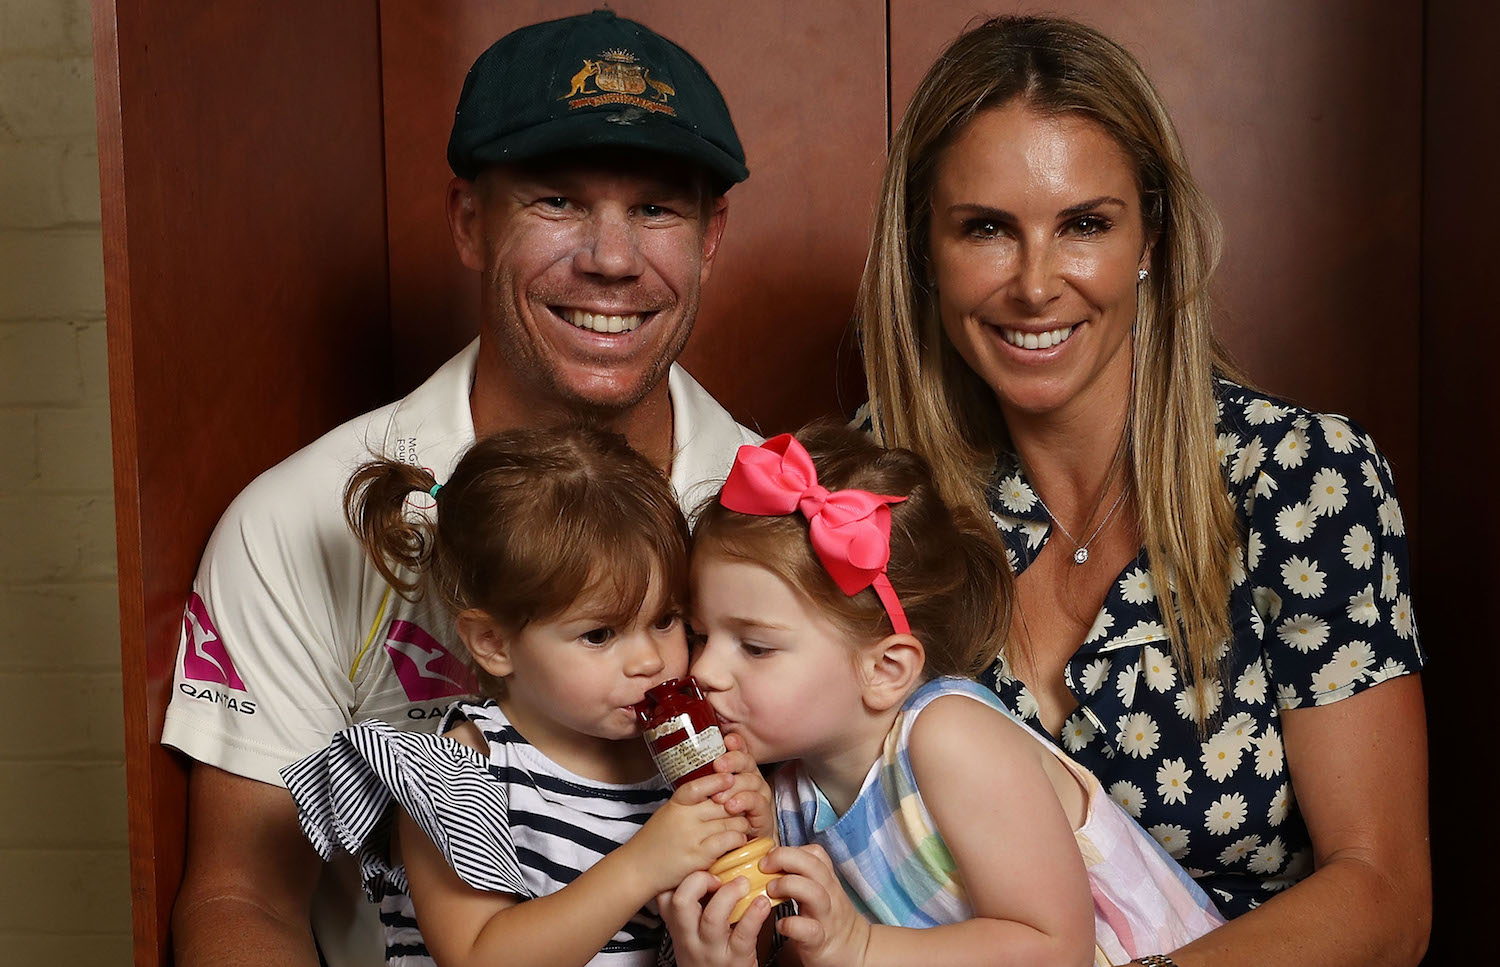 Candice And David Warner Reveal They’re Expecting Their Third Child